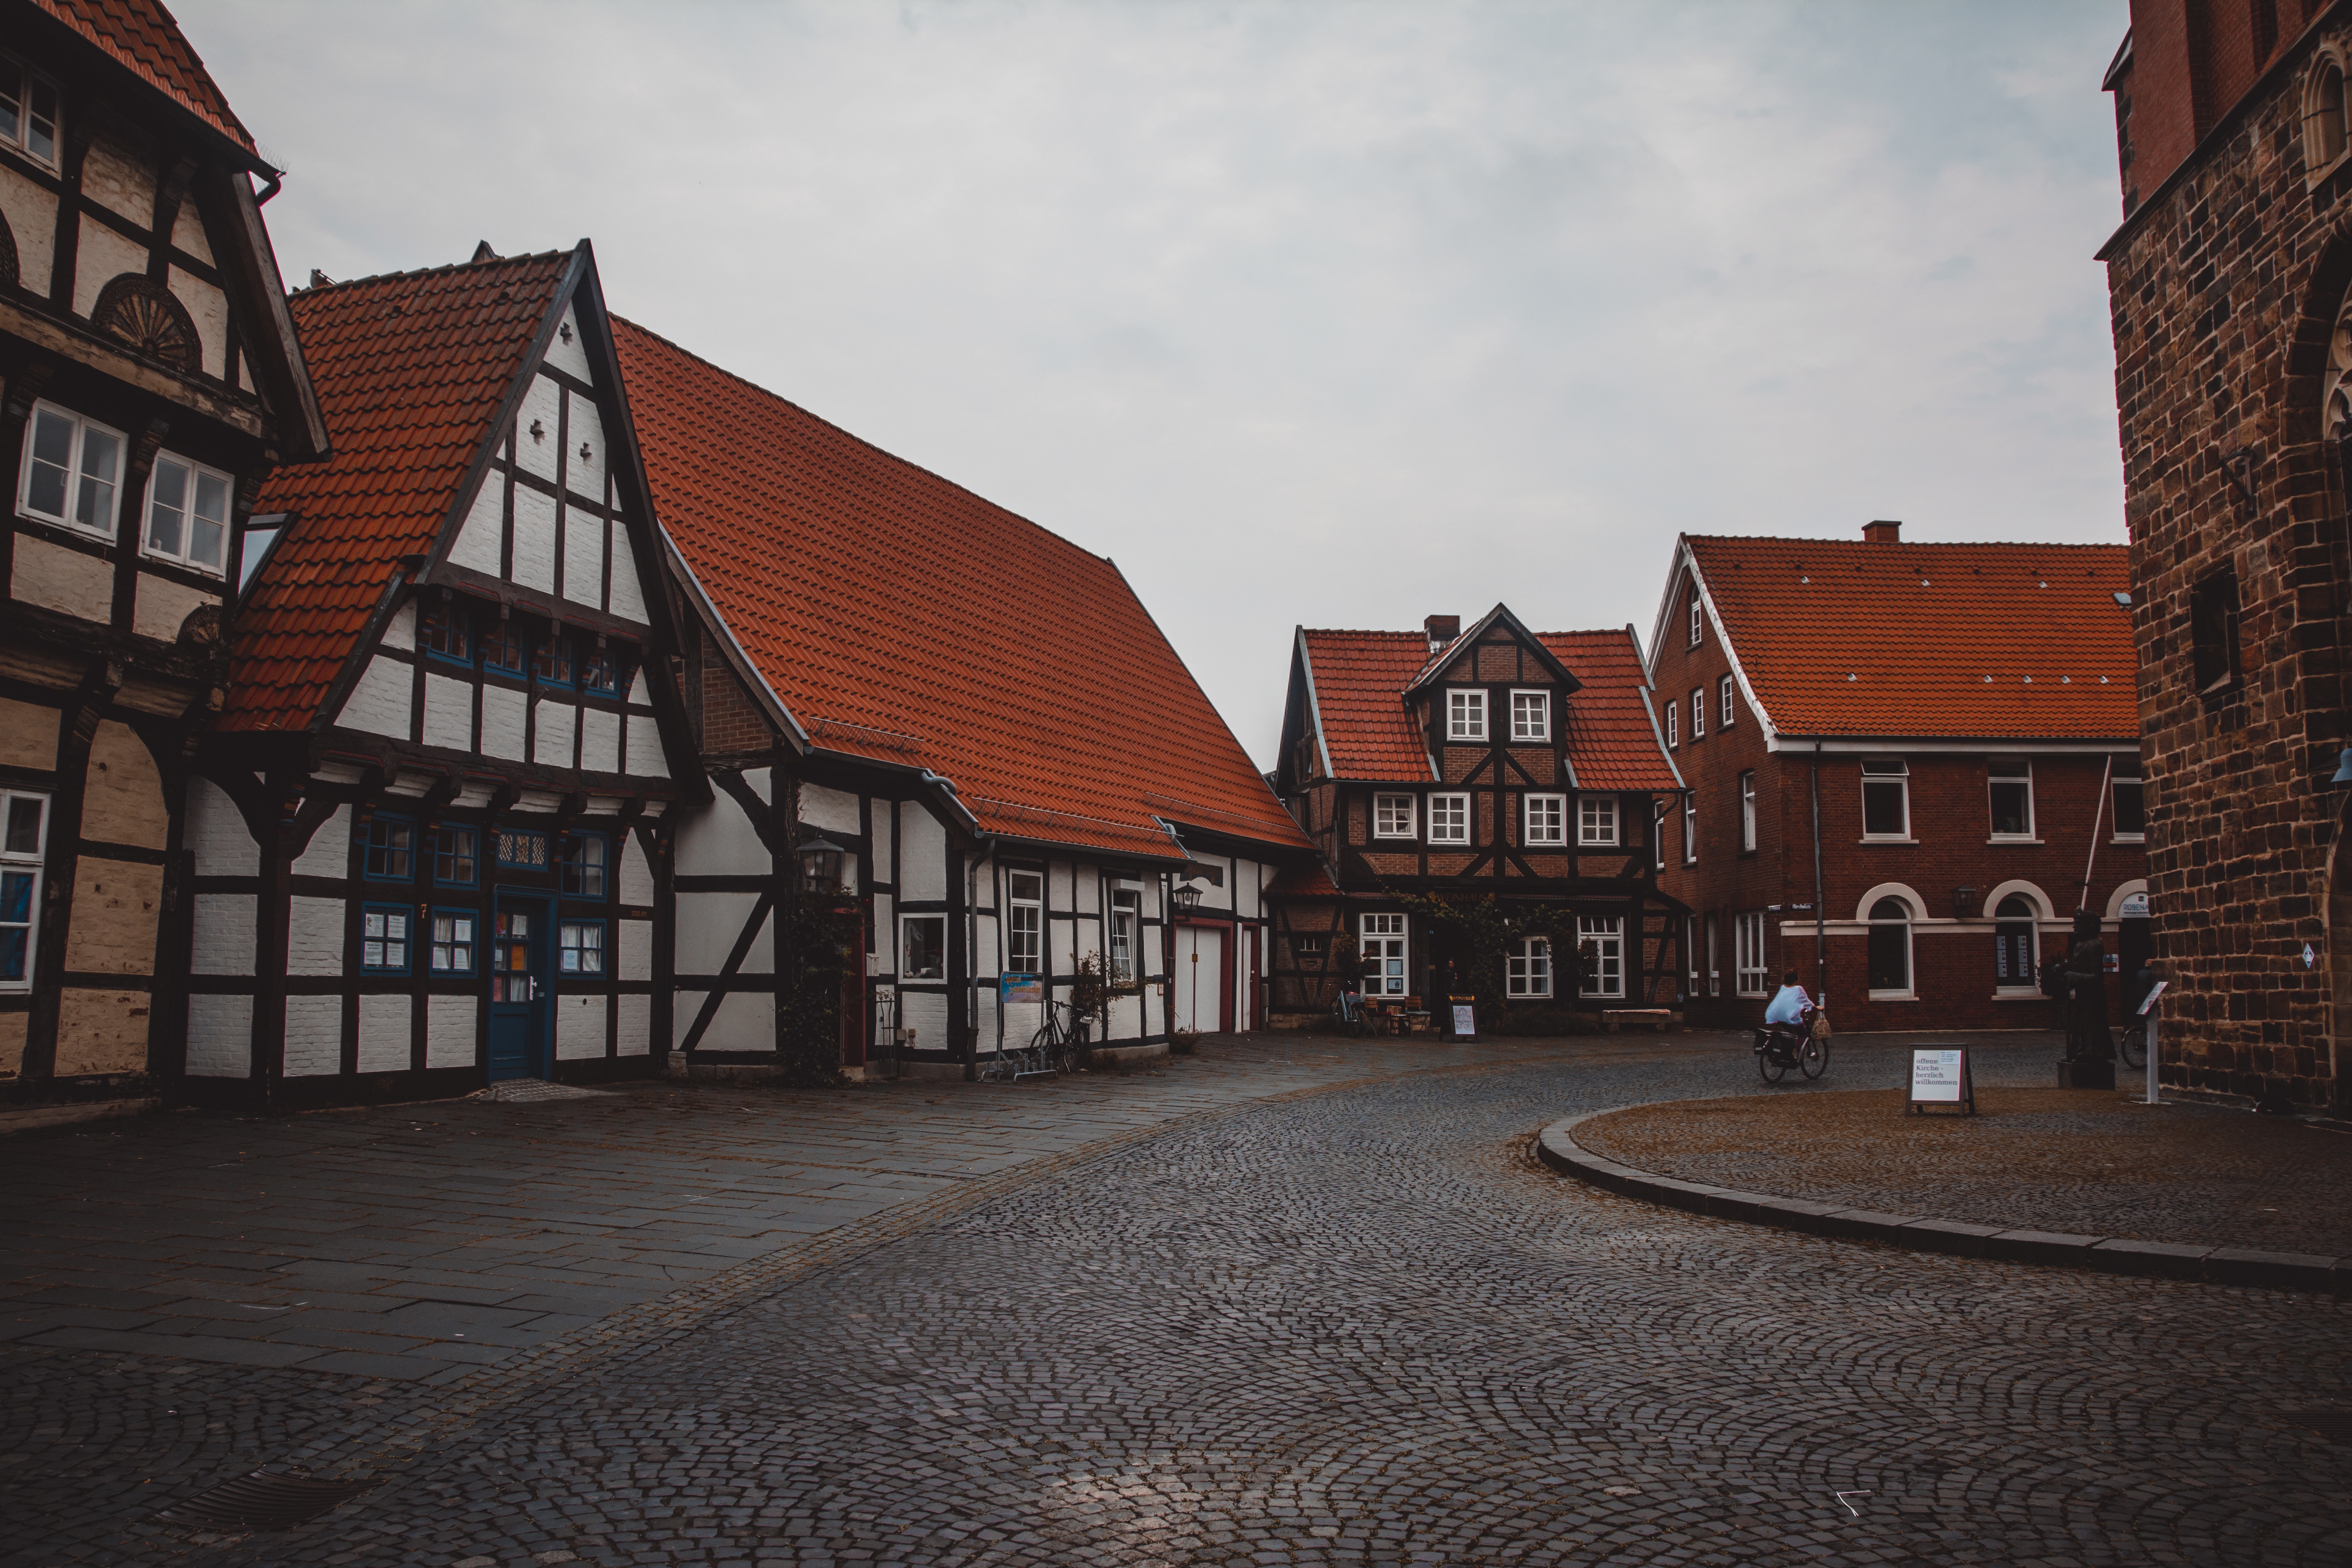 Brown and White Wooden Houses, Architecture, Bricks, Buildings, Cobblestone street, HQ Photo